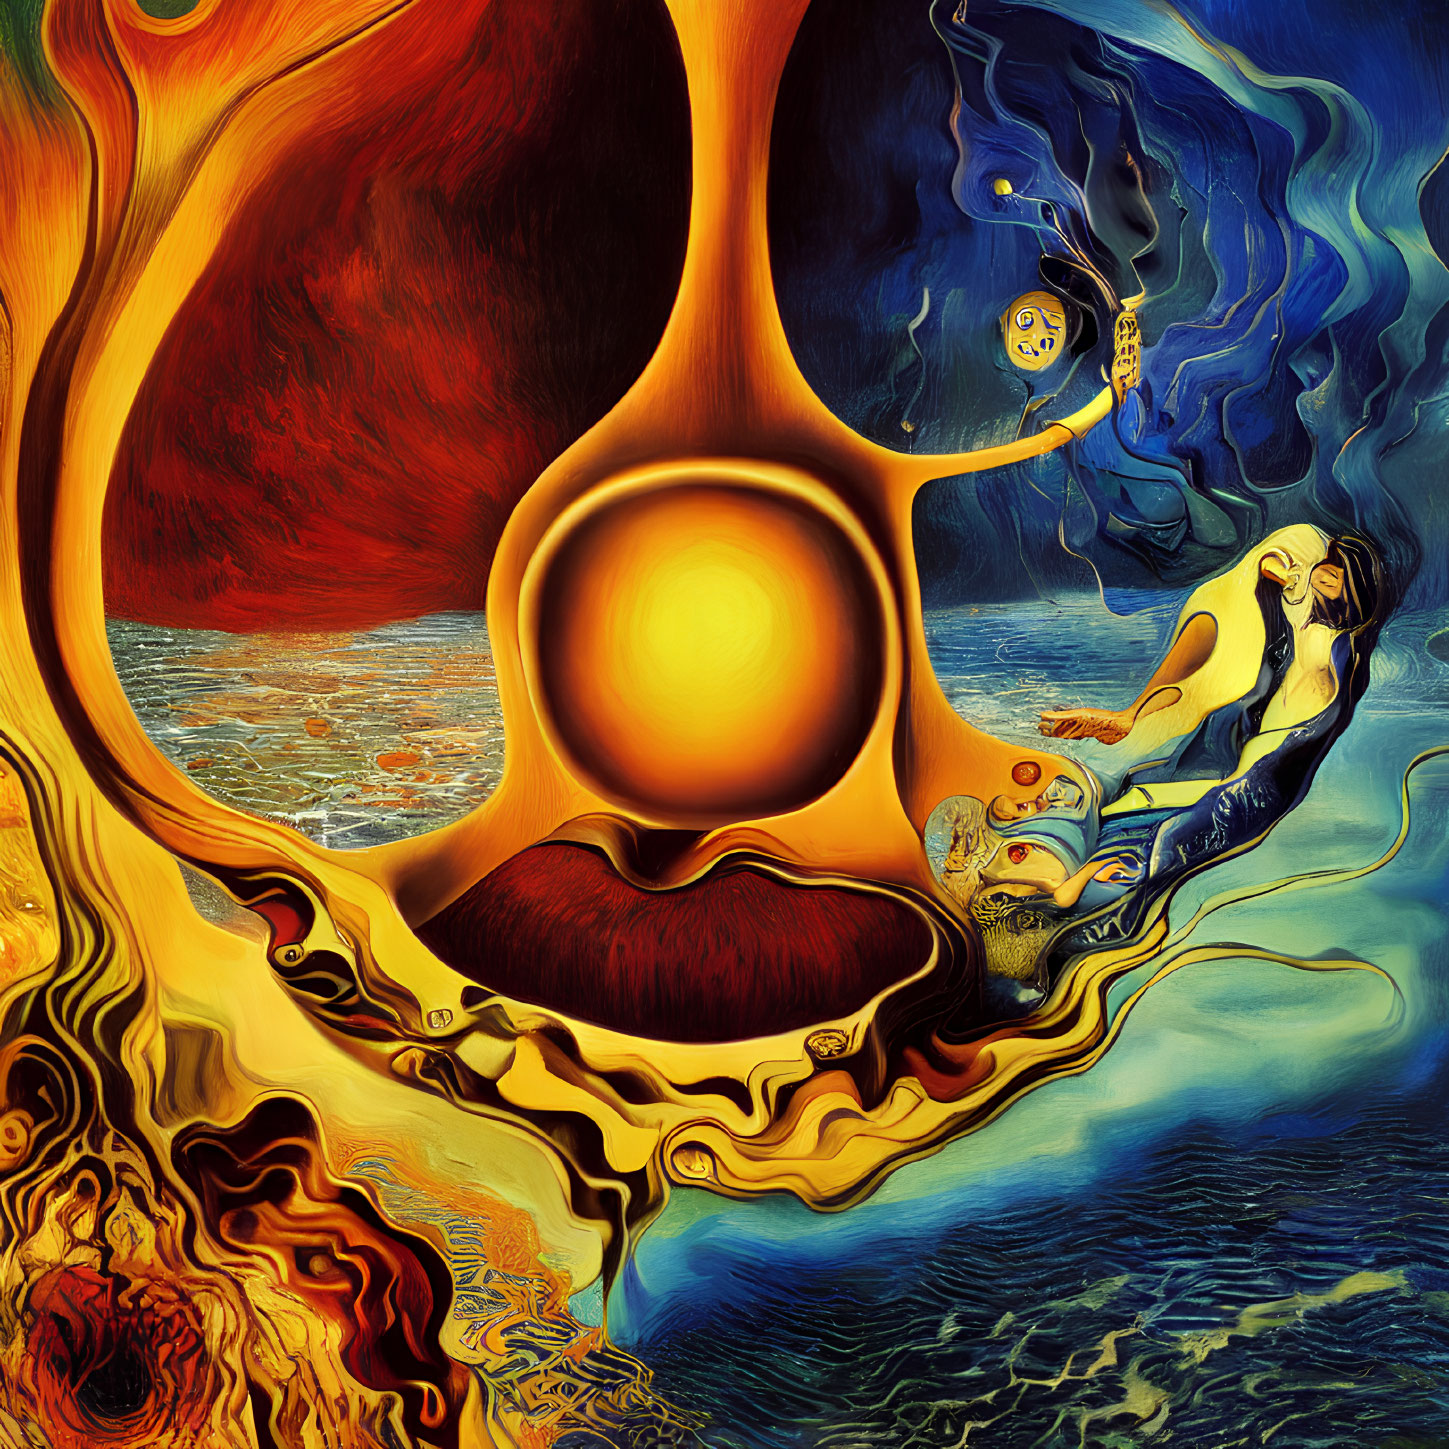 Vibrant surreal painting with abstract forms in red, blue, and gold.